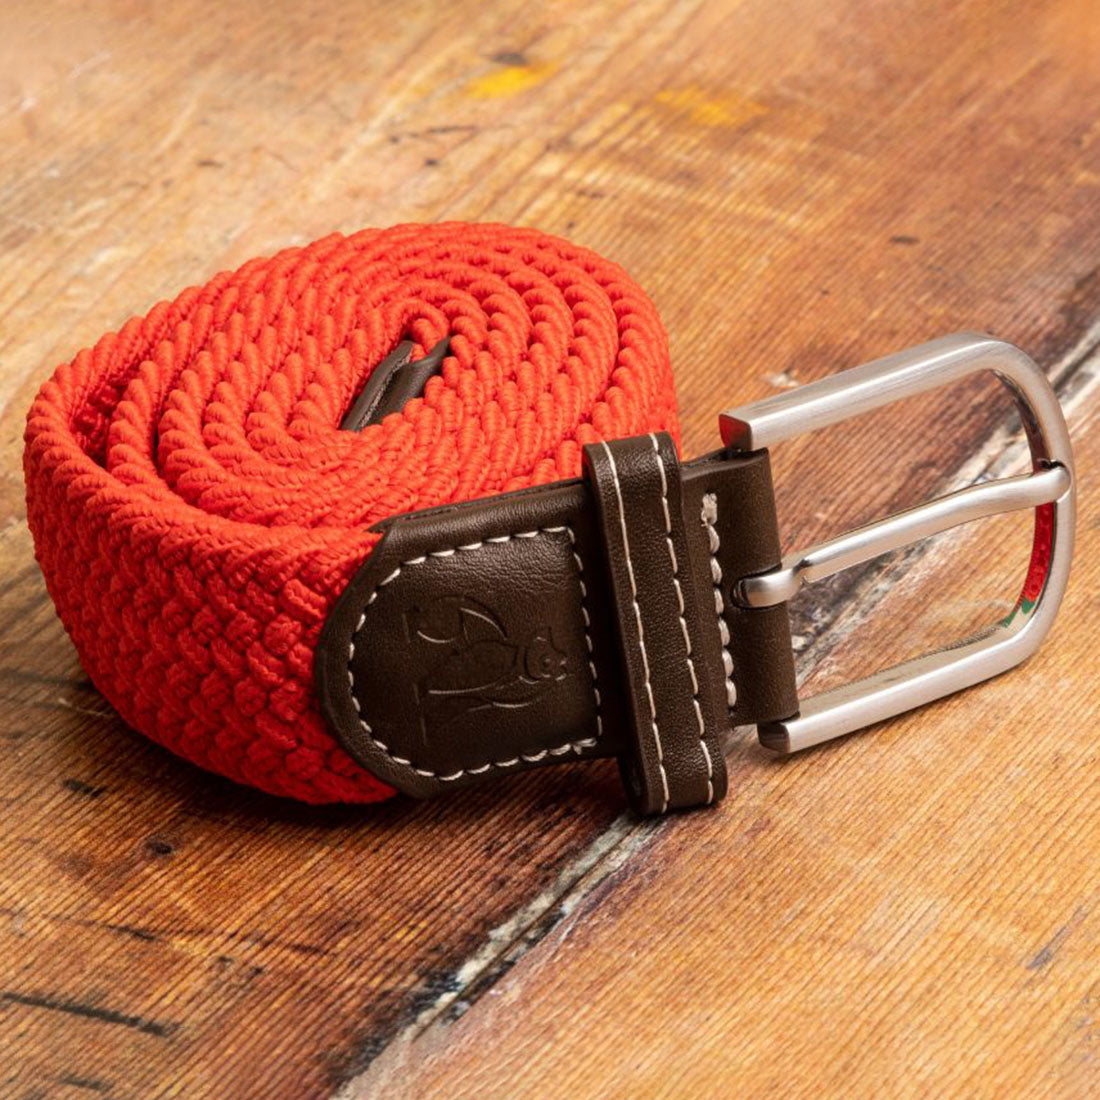 Woven Belt - Classic Red